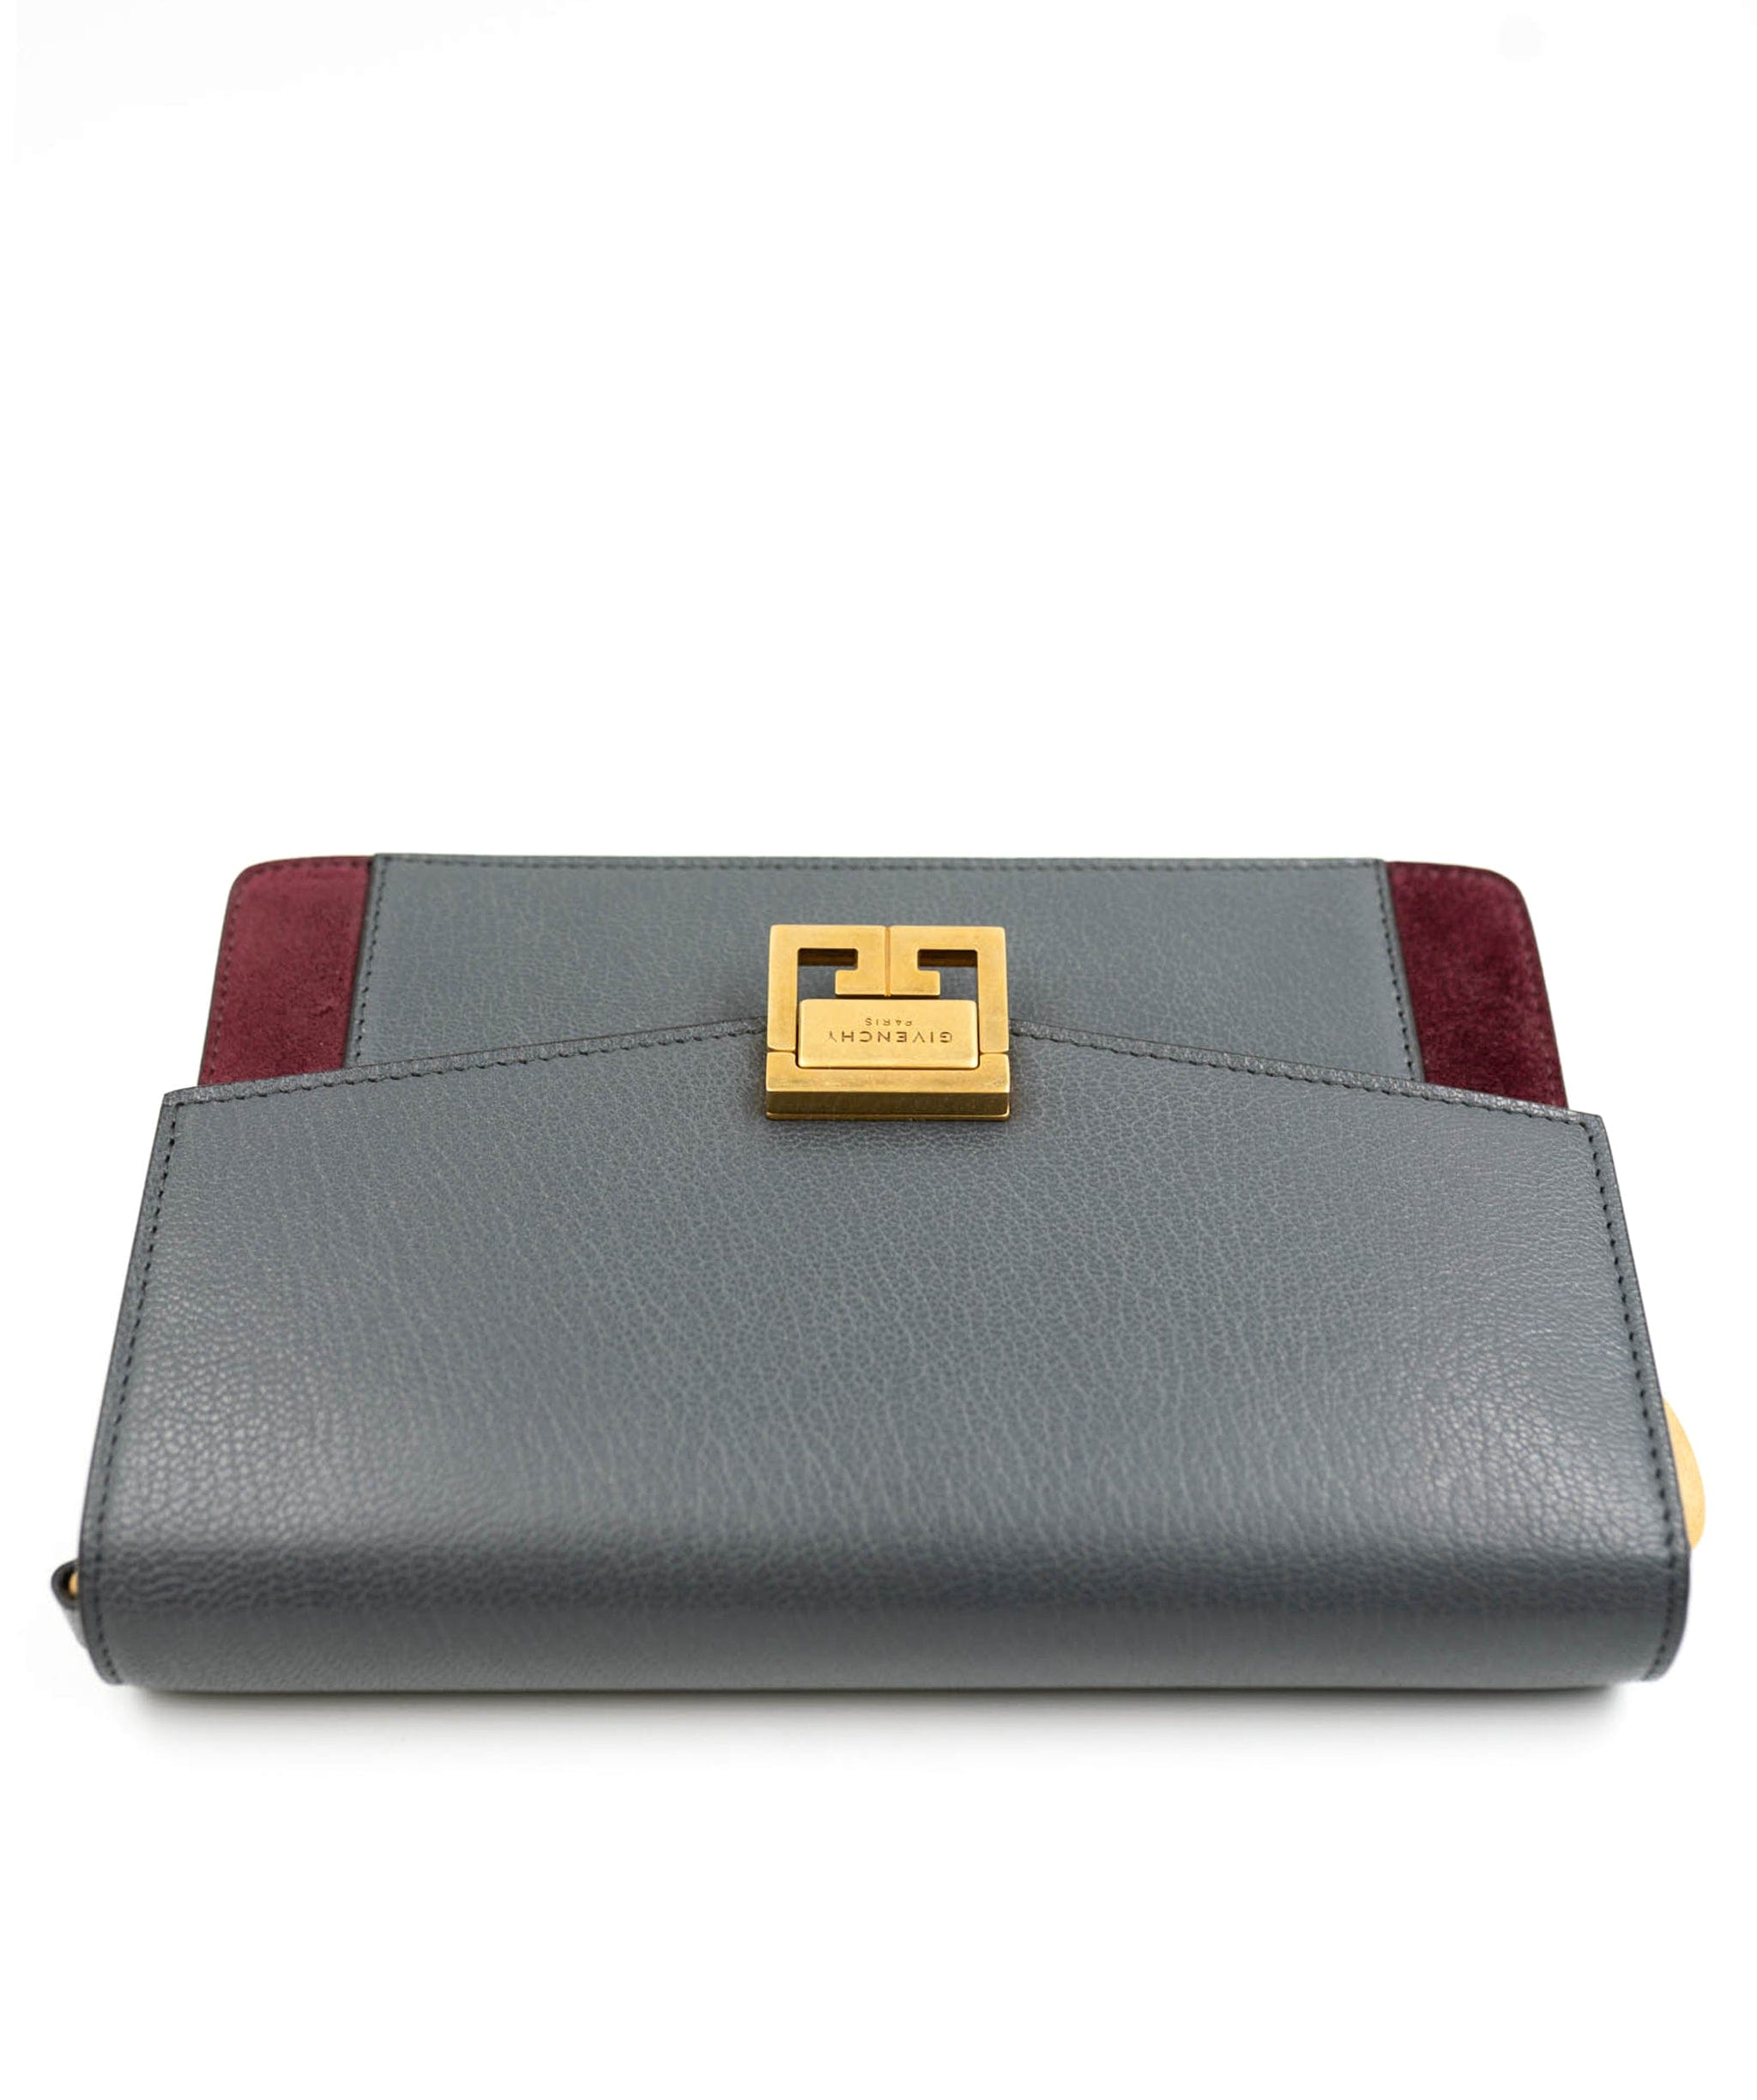 Givenchy Givenchy grey and burgundy wallet on chain - AJC0037